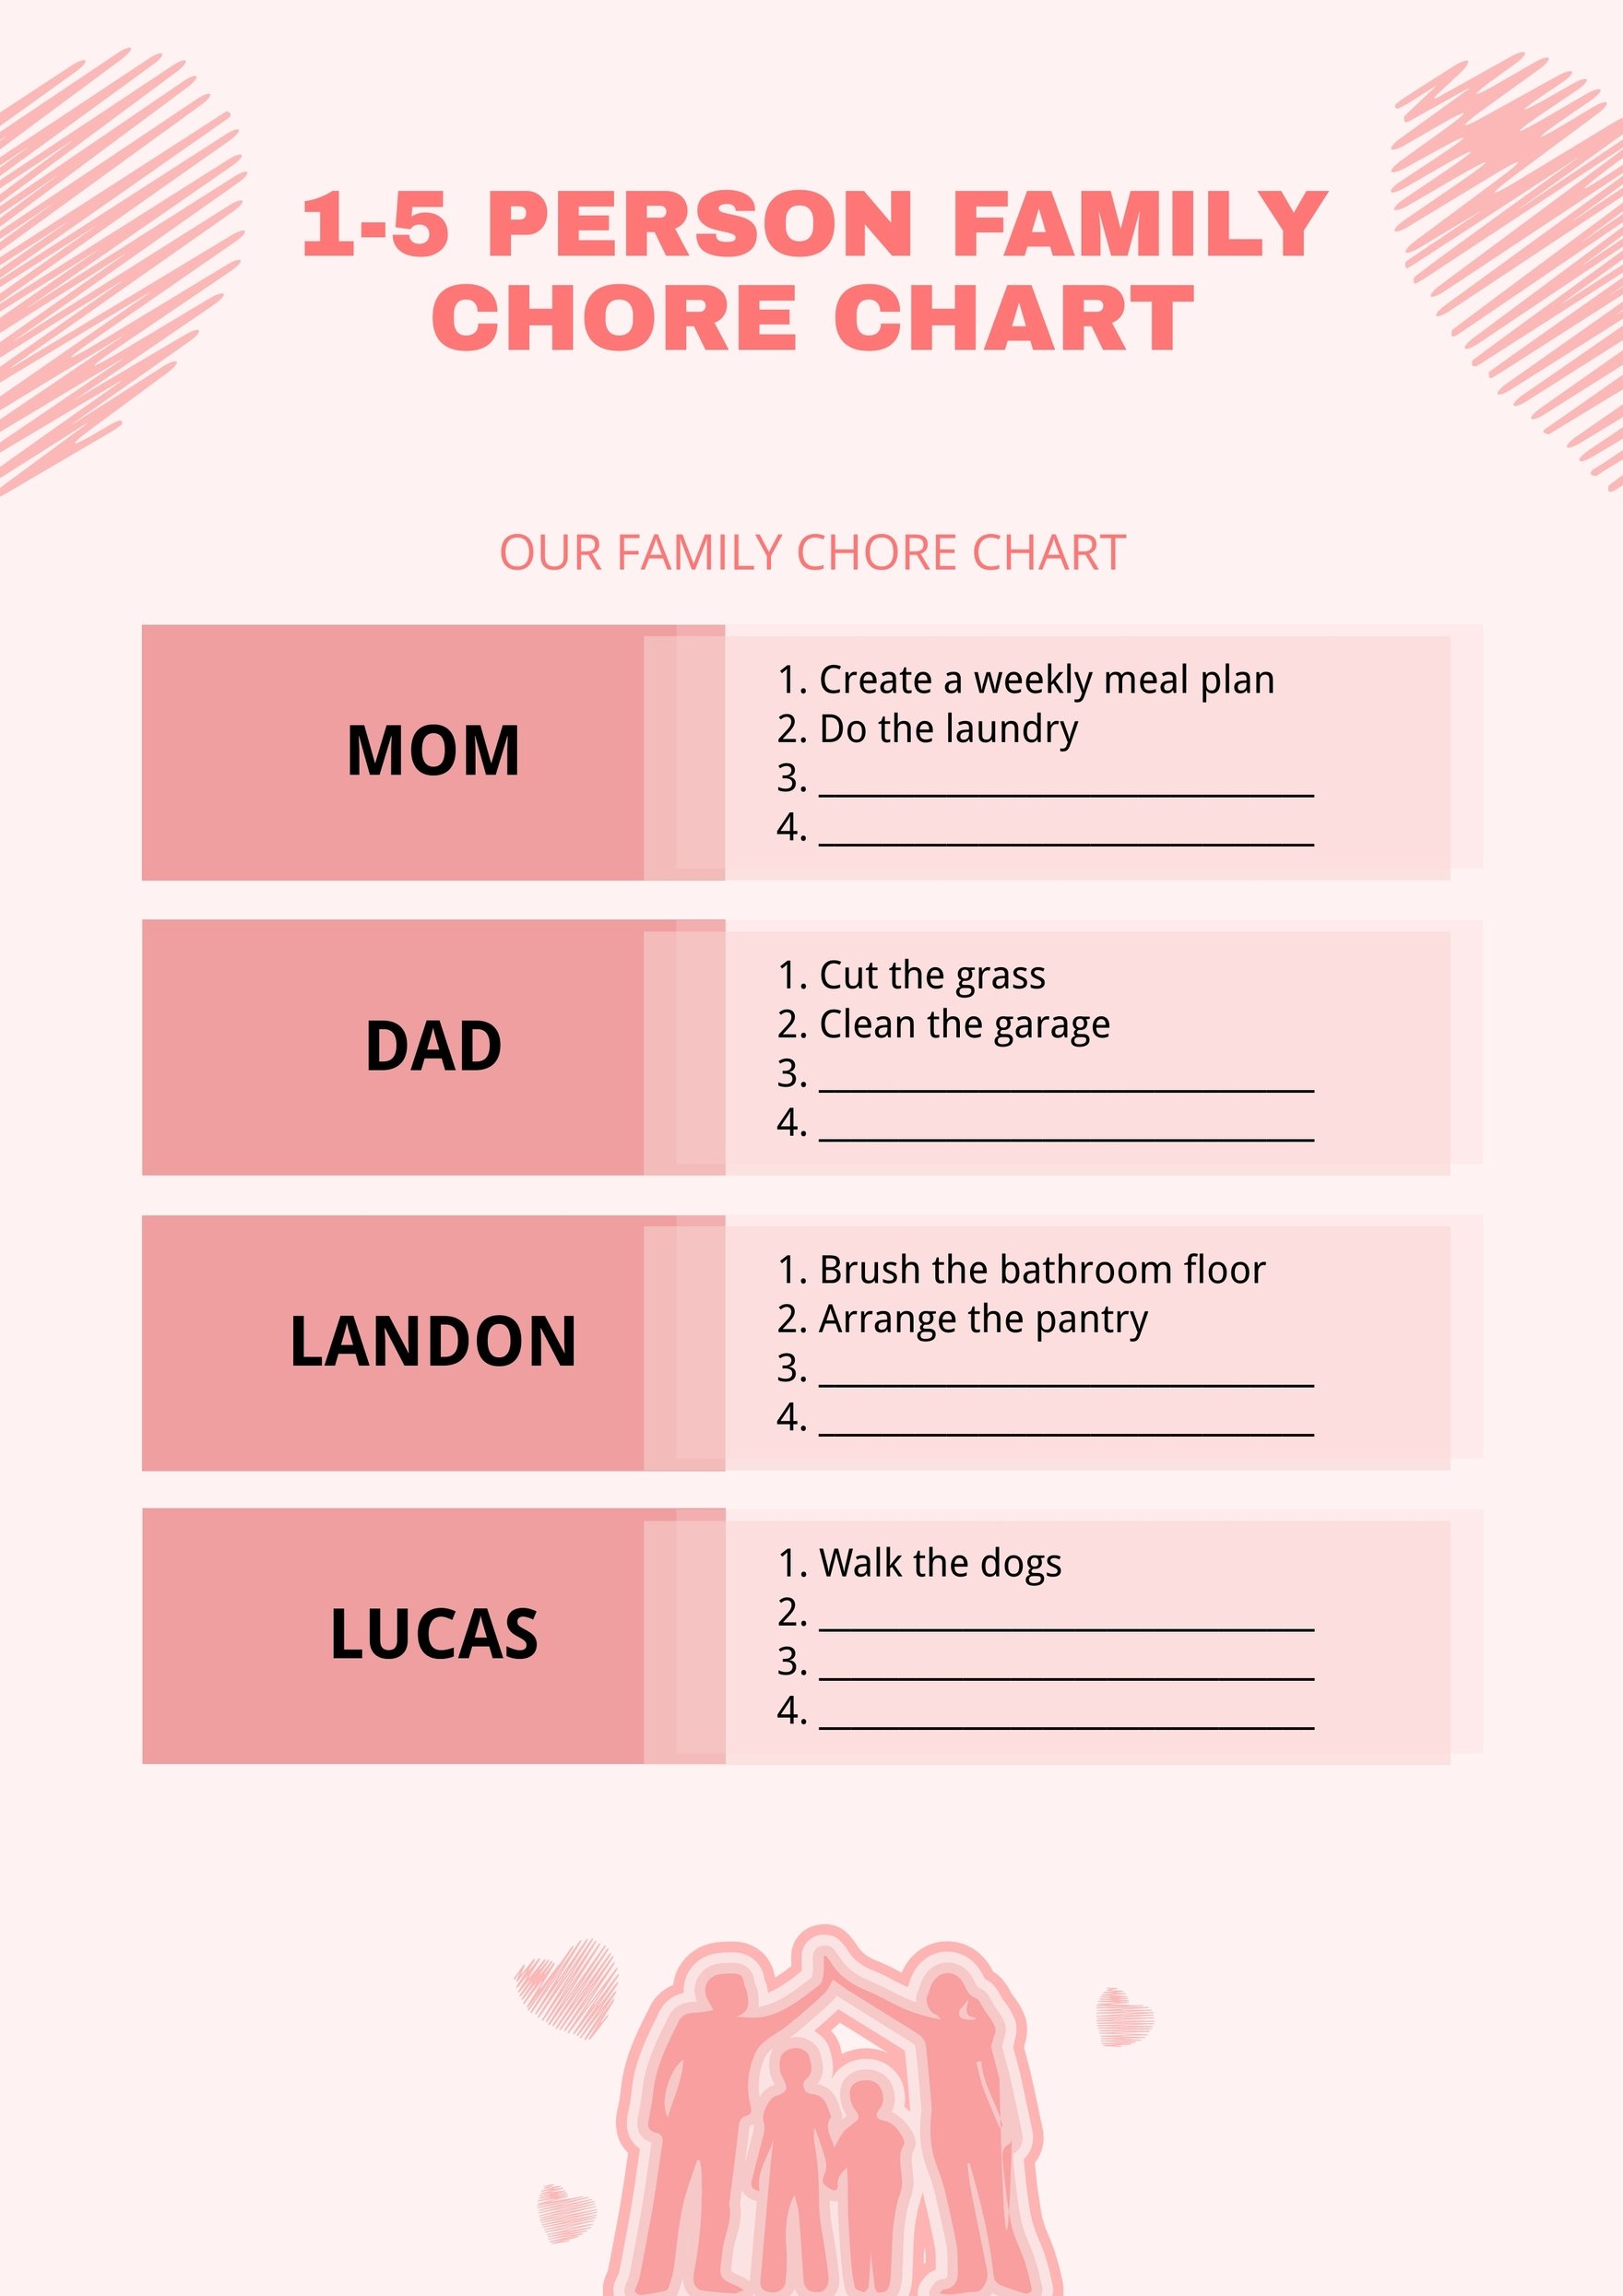 1-5 Person Family Chore Chart